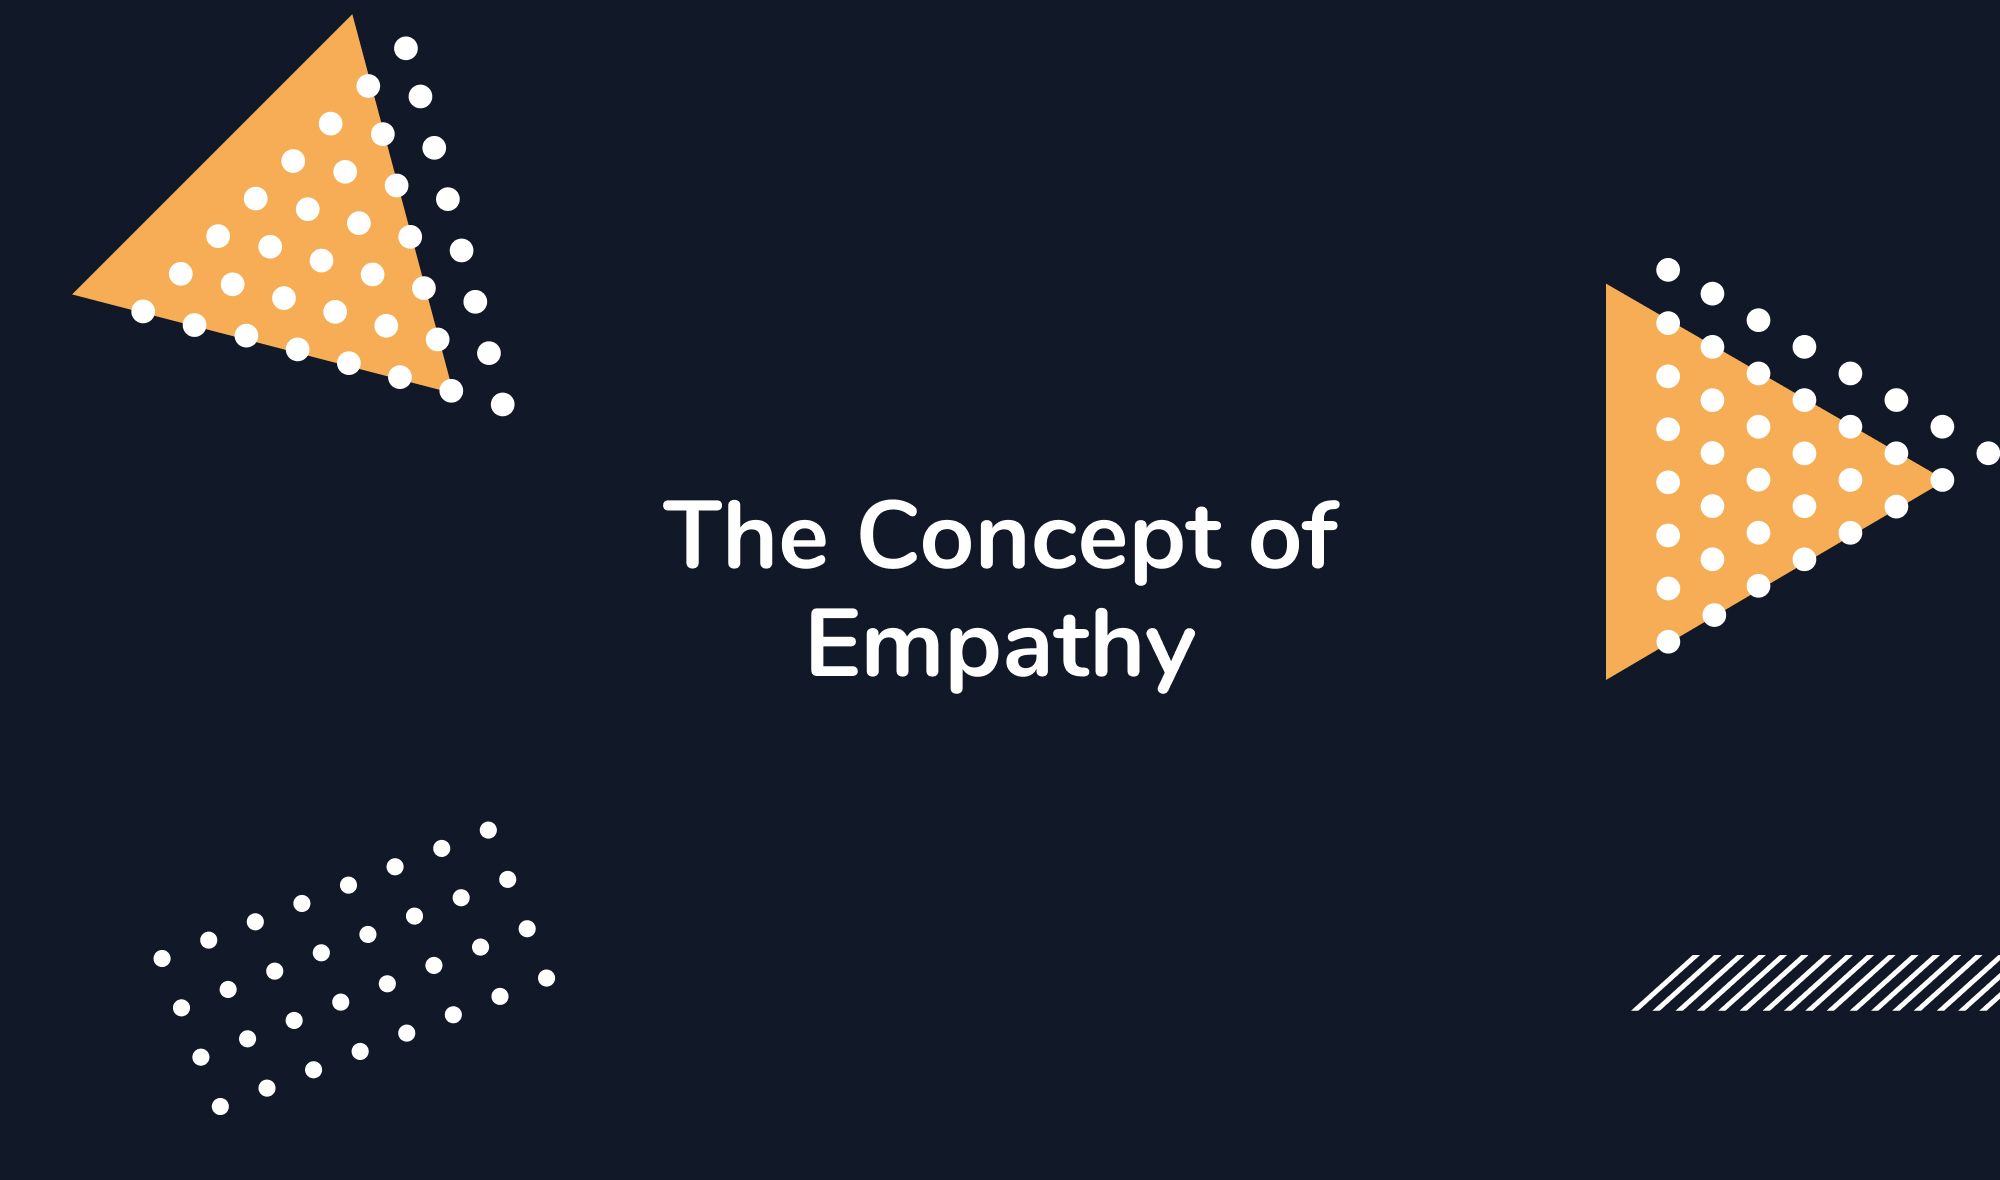 The Concept of Empathy